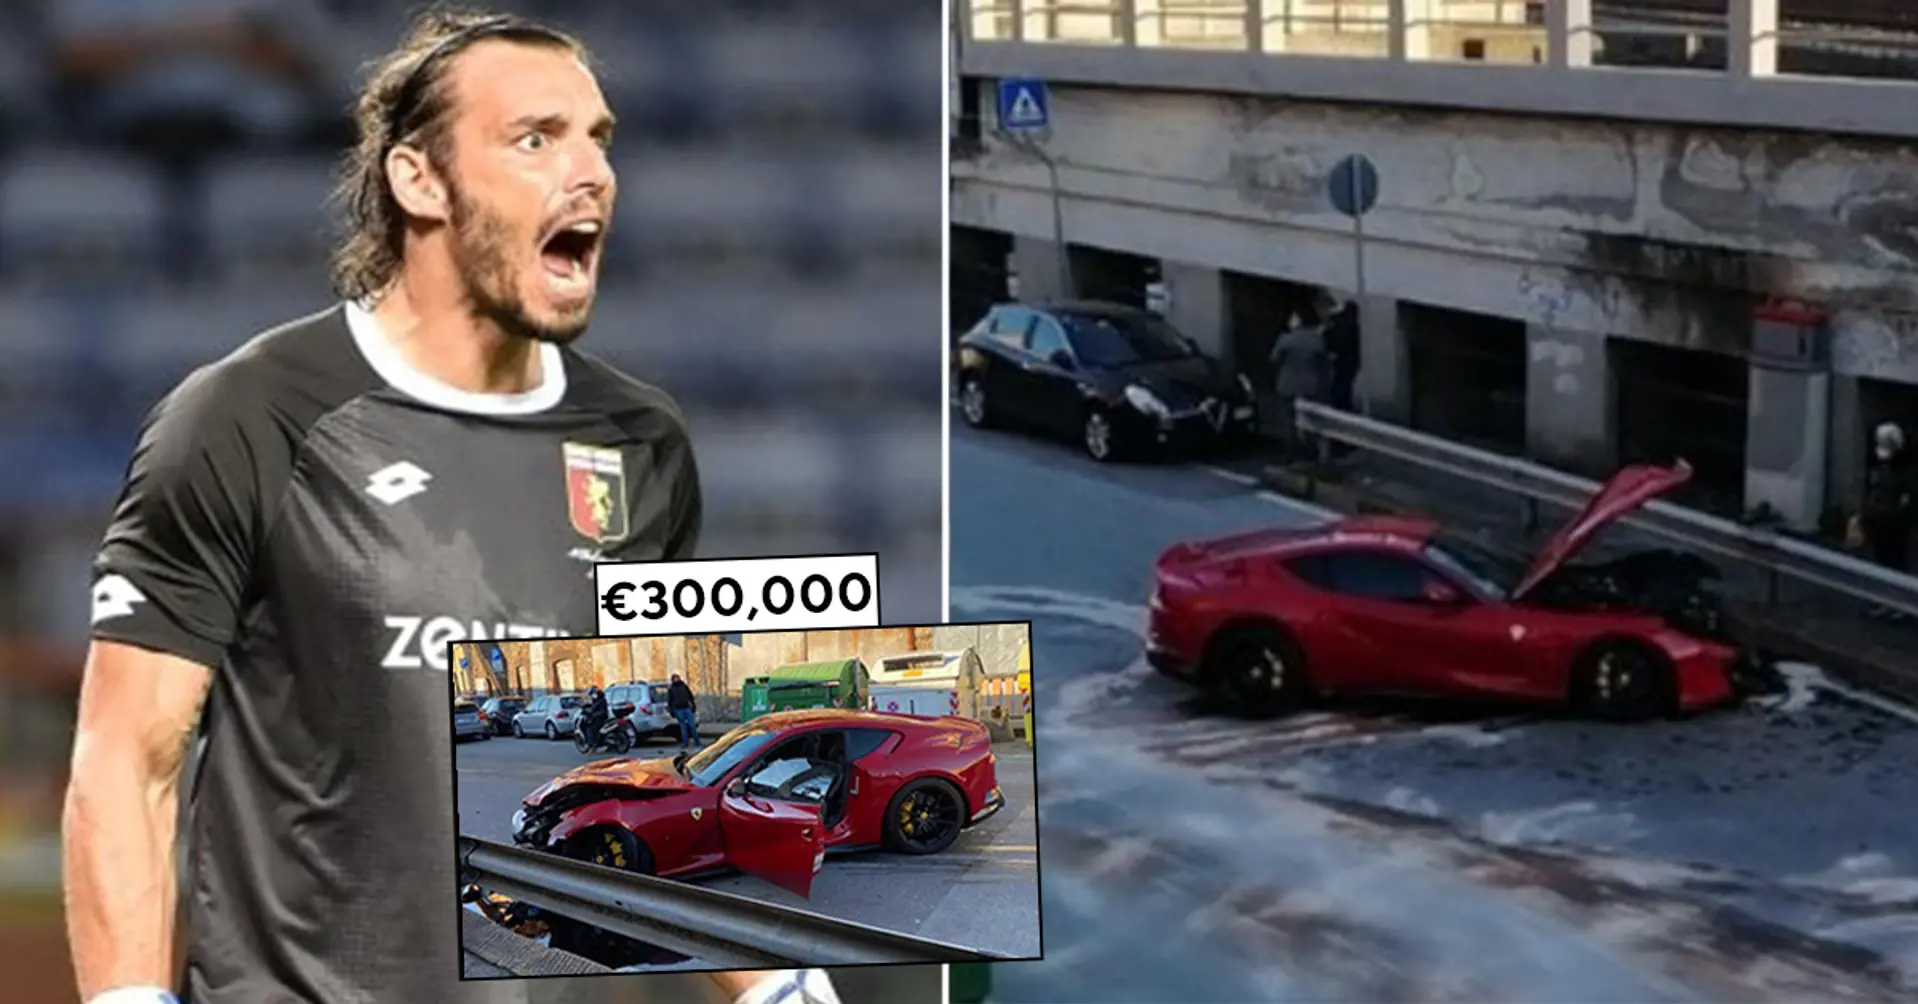 Genoa goalkeeper brings his Ferrari to the carwash, later finds out employee destroyed it